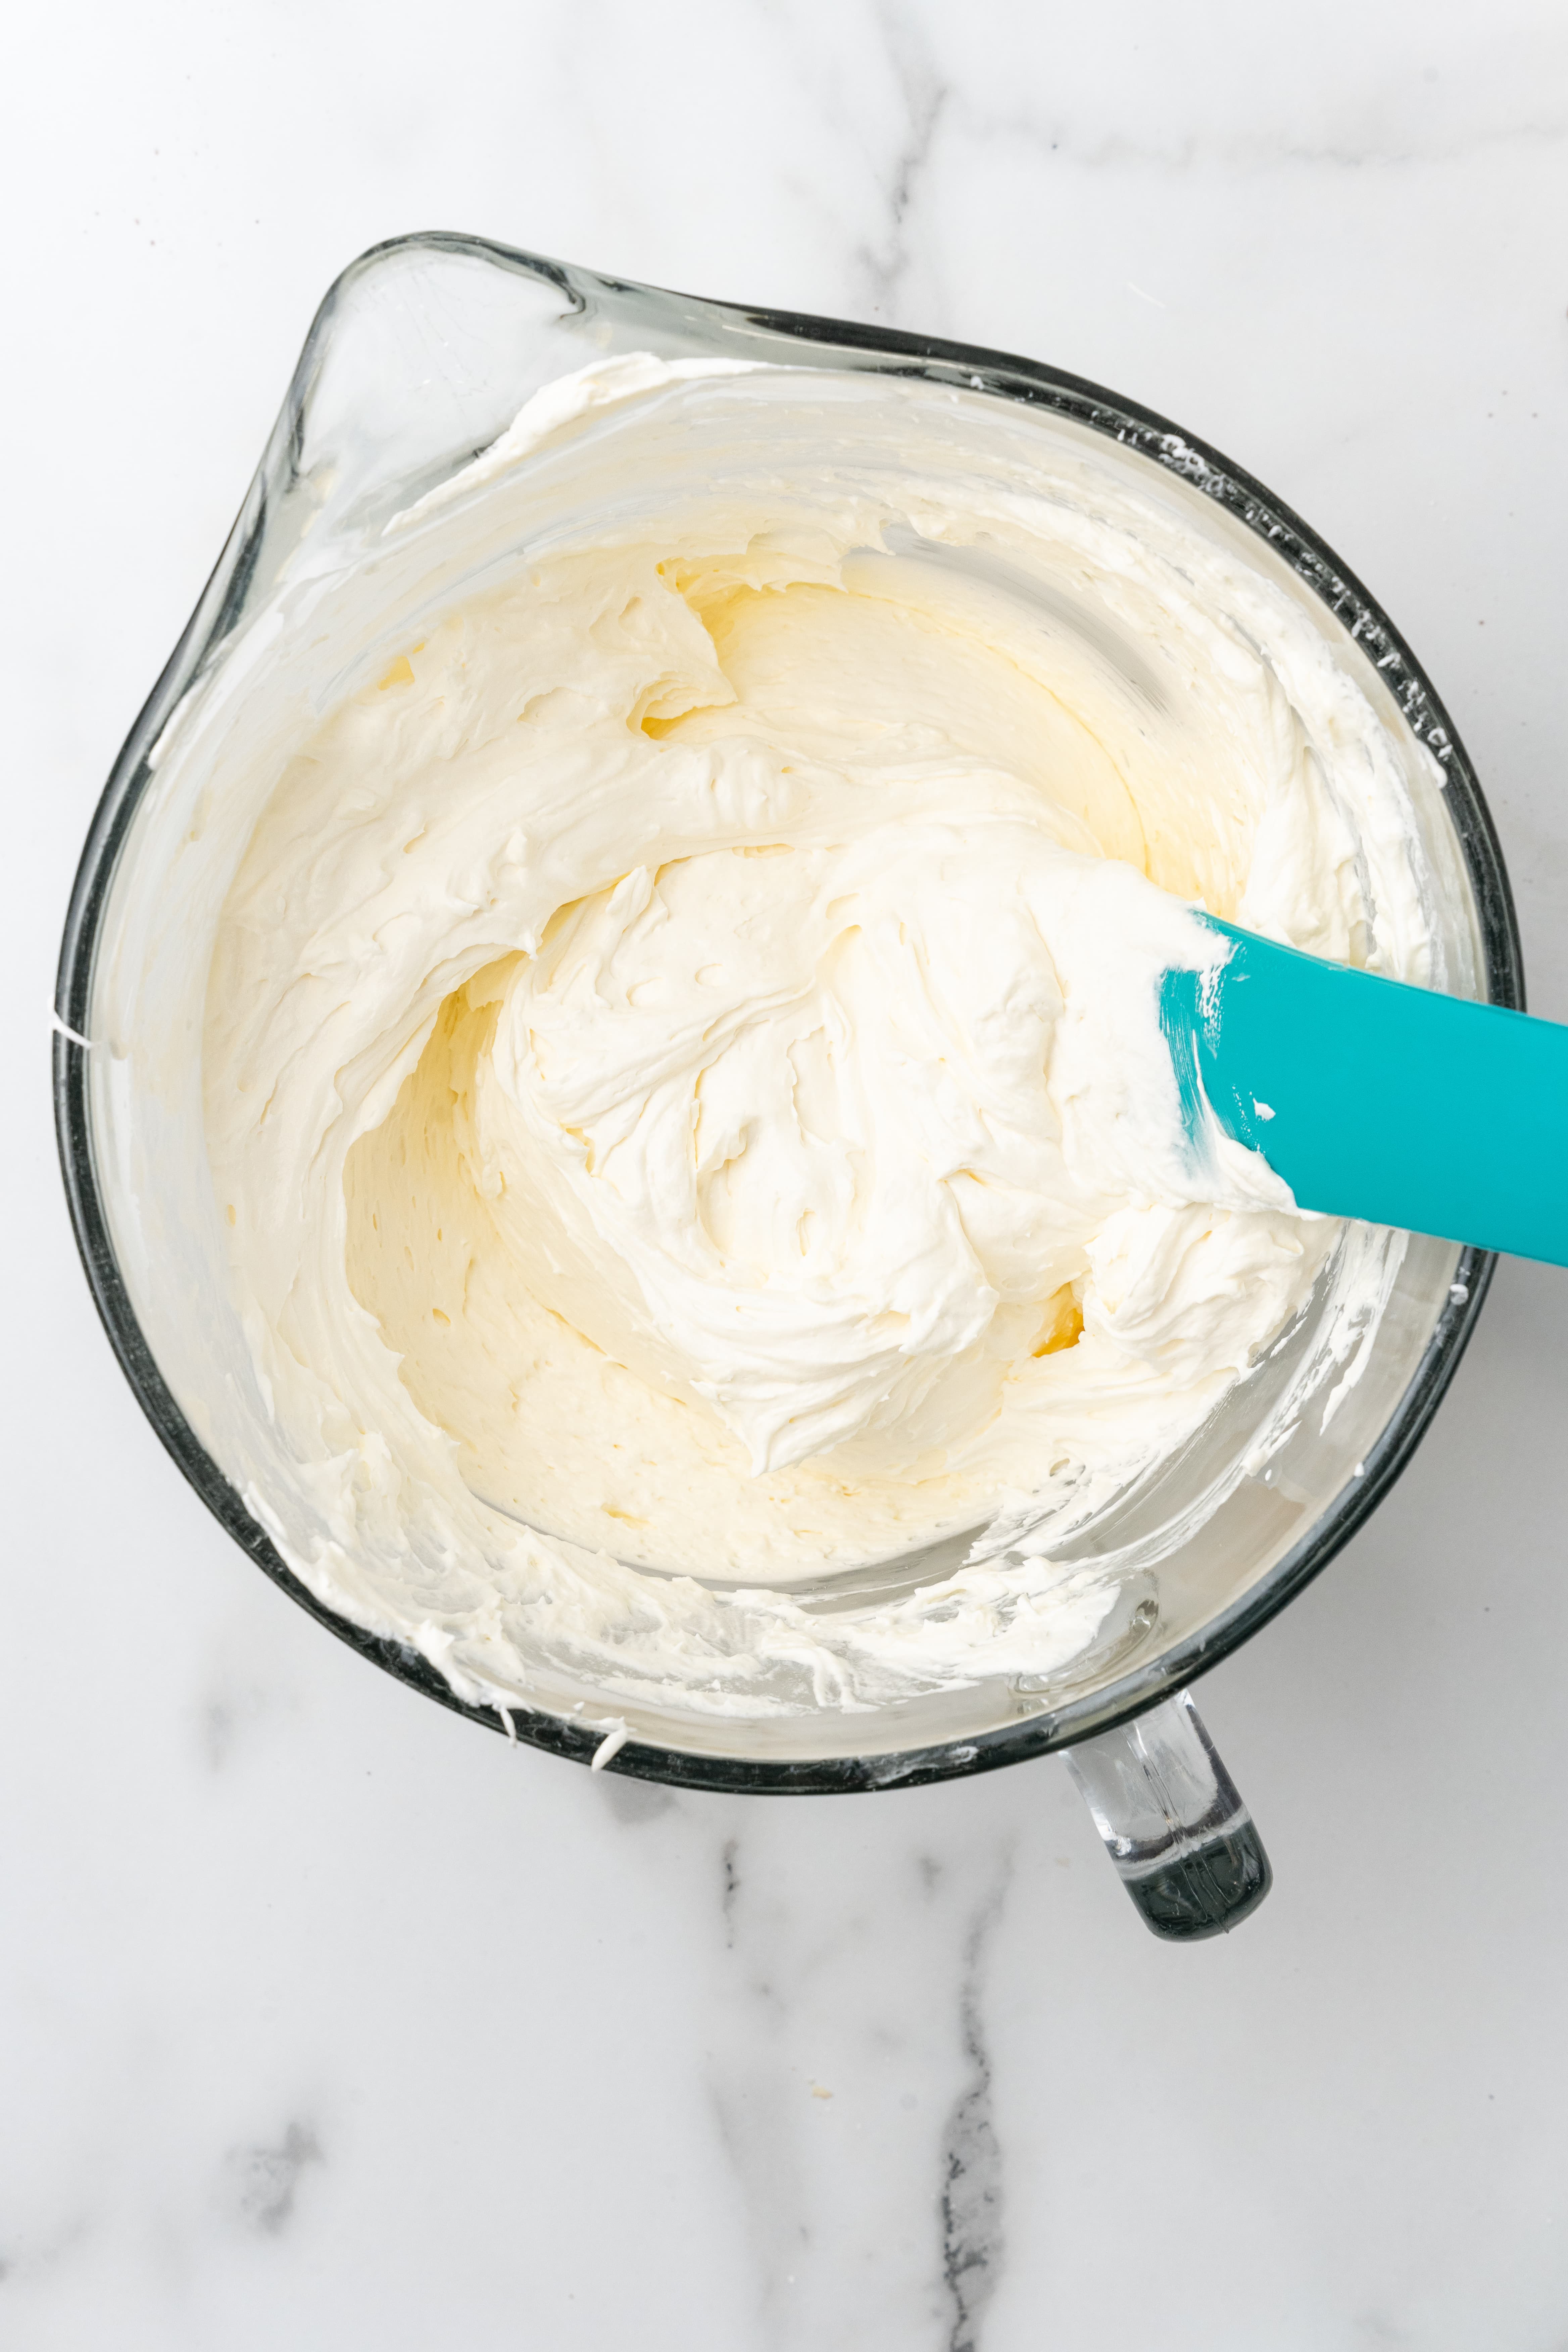 creamy marshmallow fluff in a glass mixing bowl